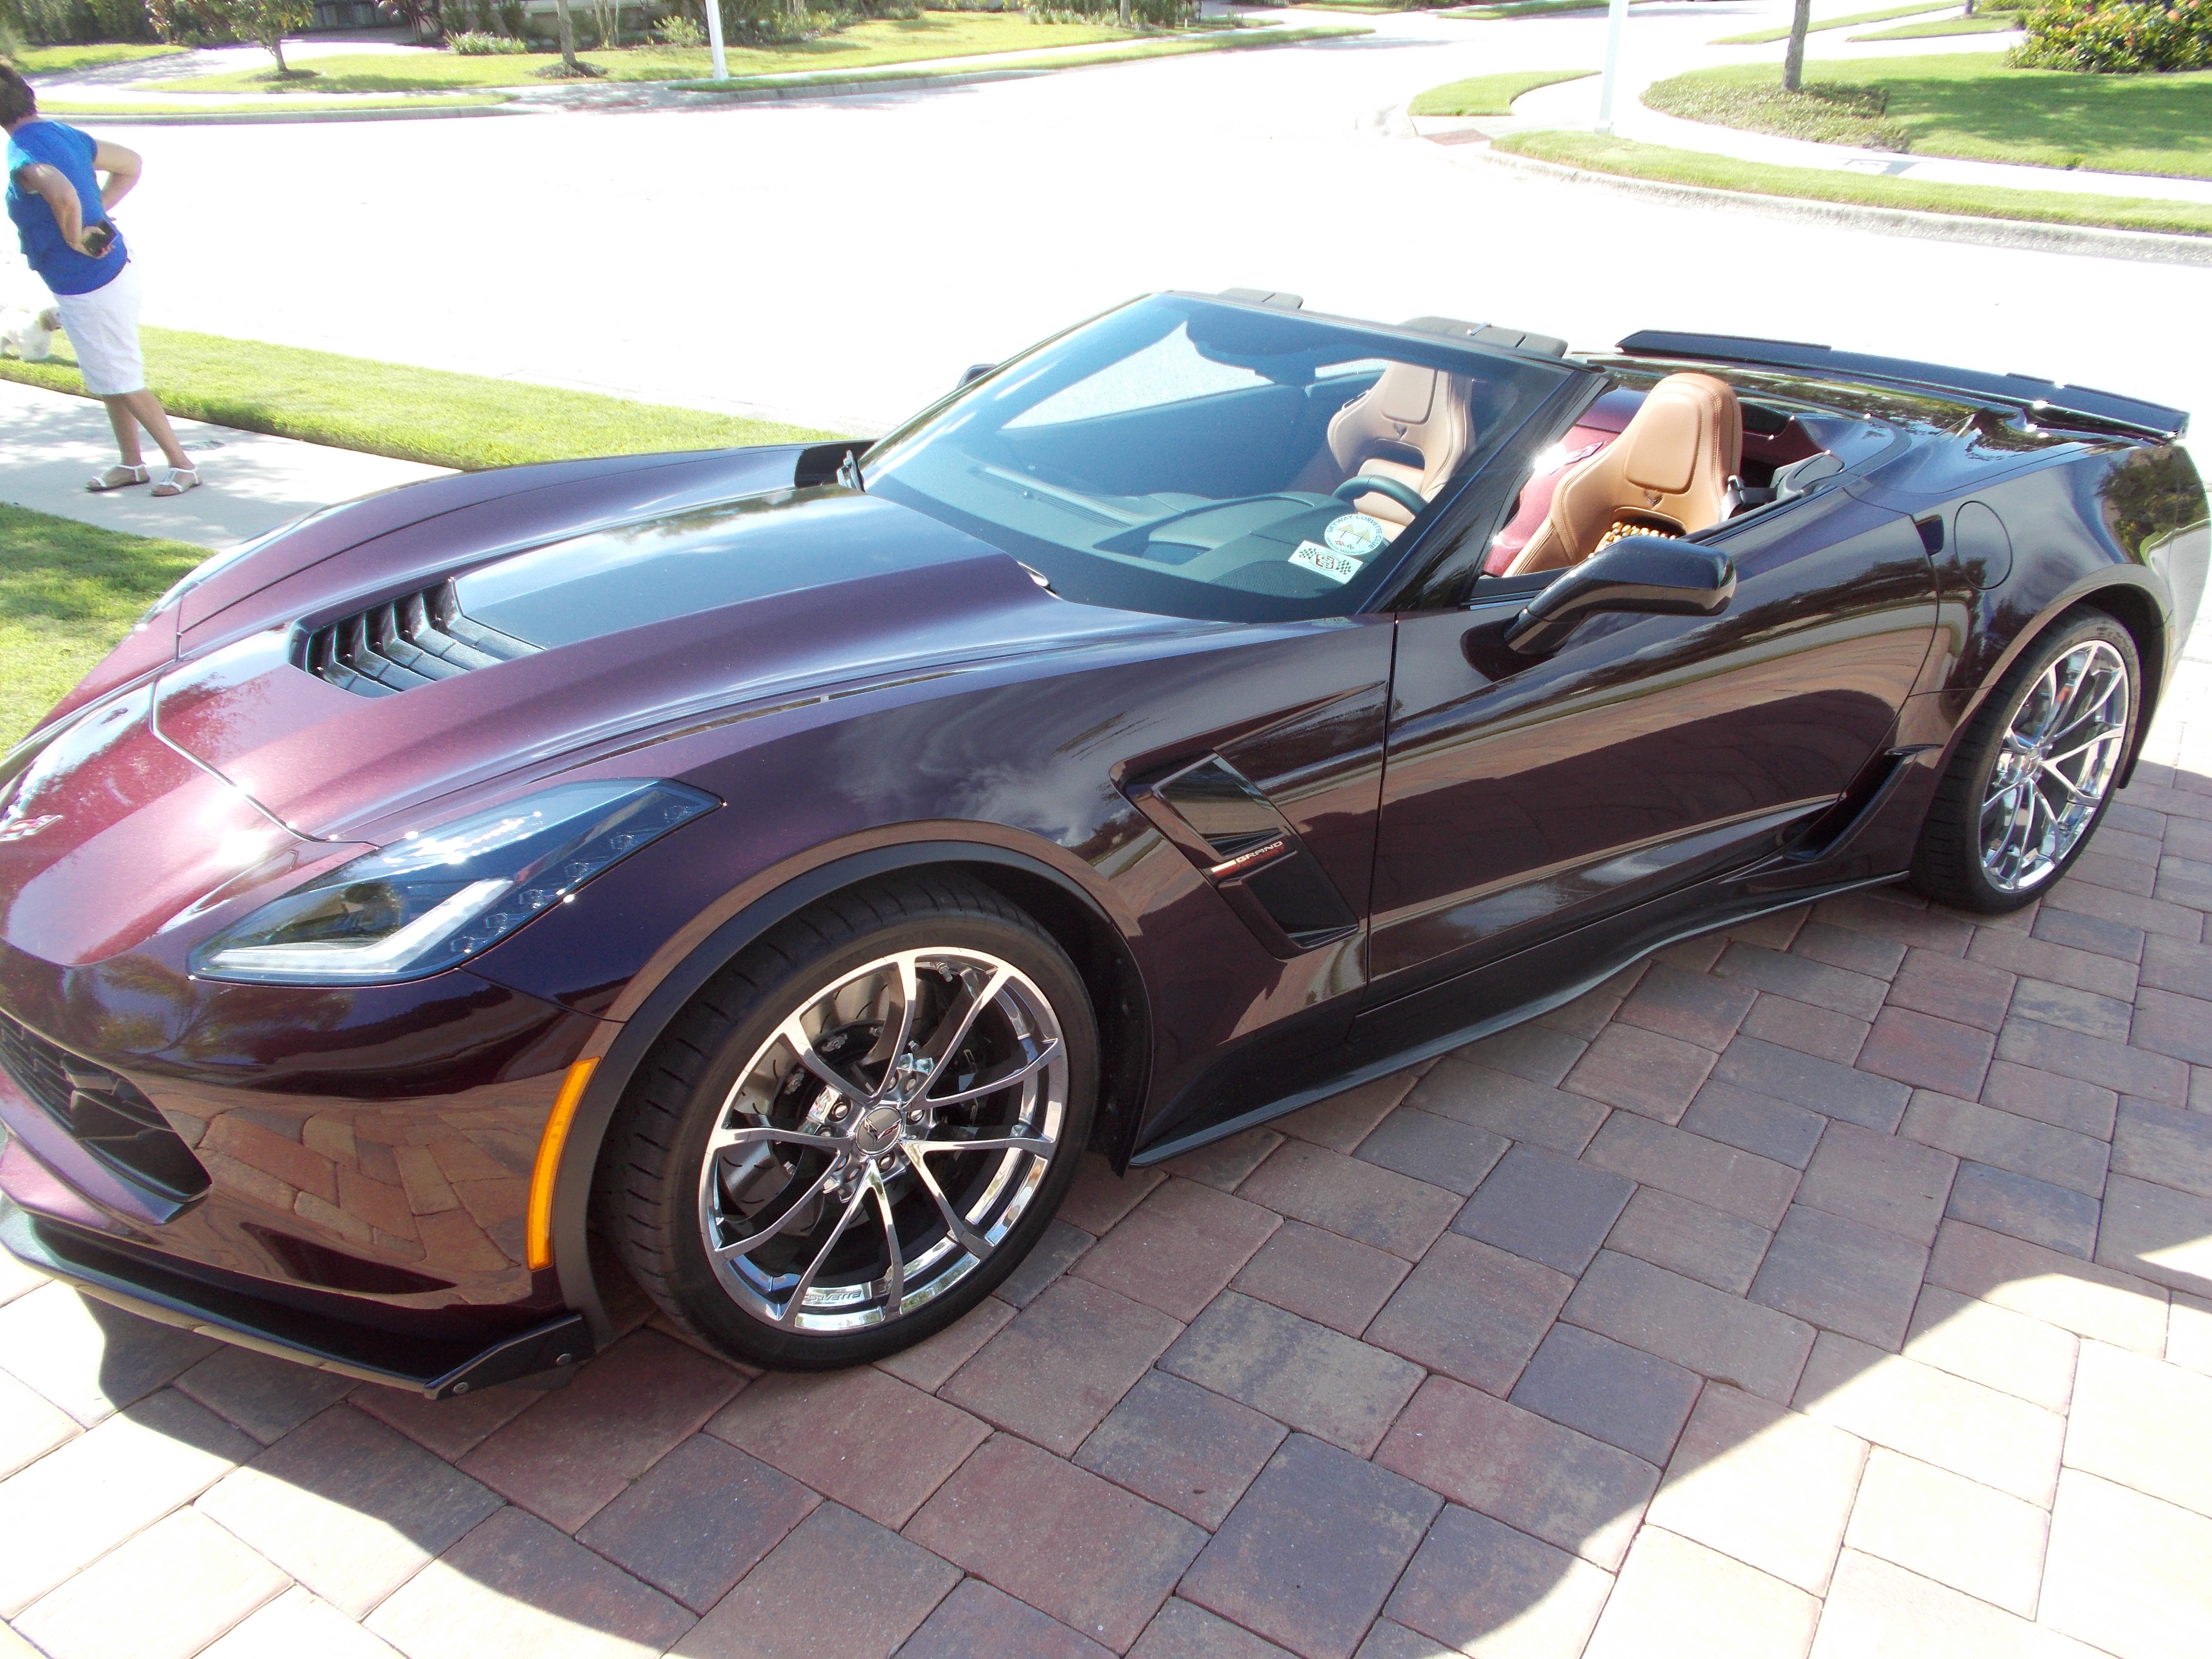 C7 top up top down Convertible ONLY picture thread? - Page 3